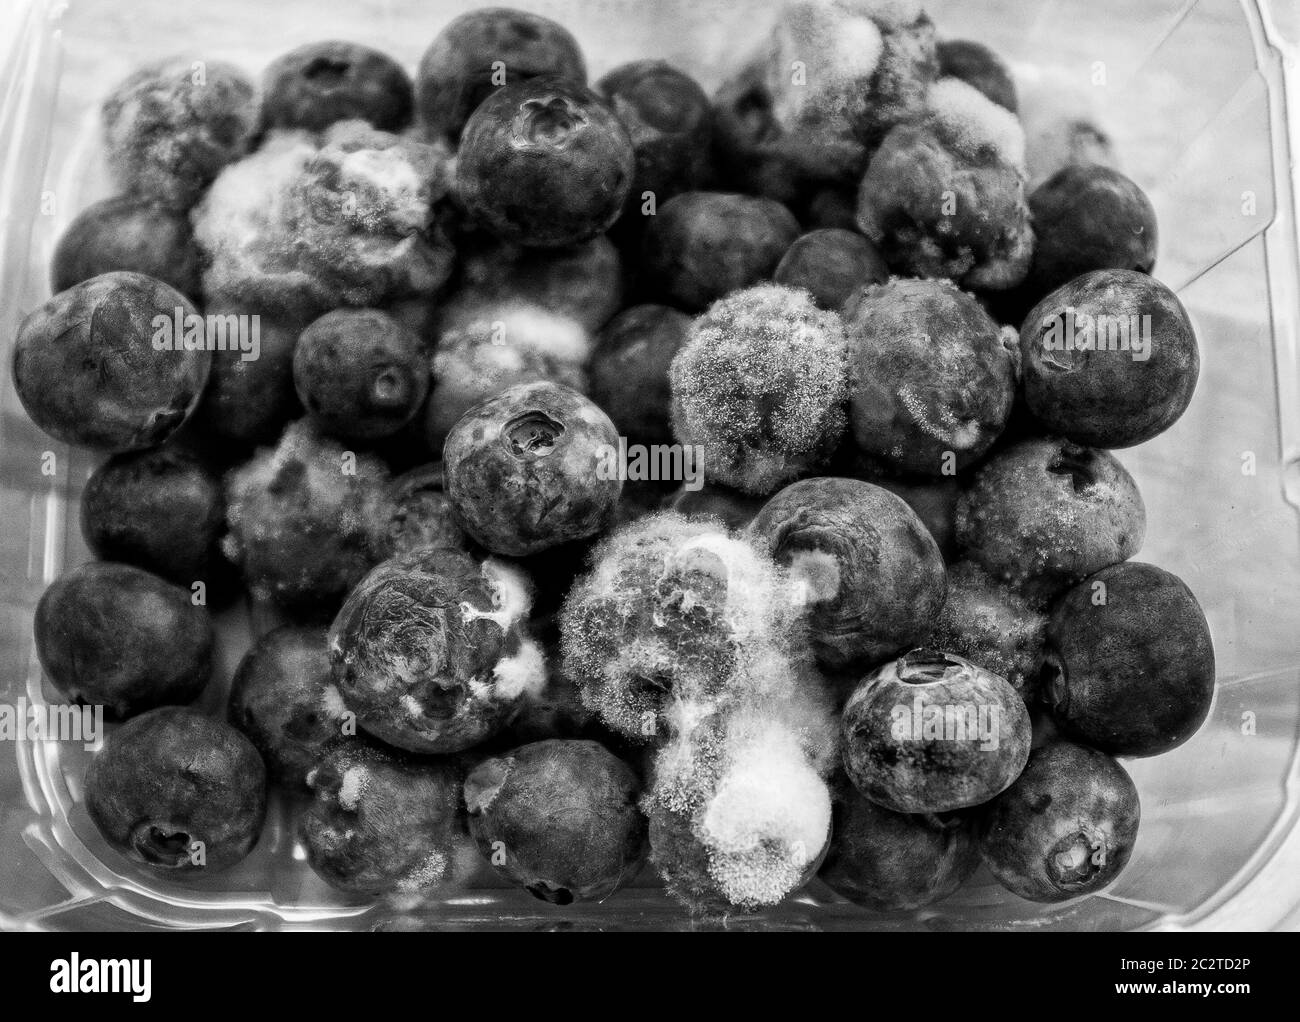 Fresh blueberries which have gone well past their sell by date and have gone mouldy and become inedible or not safe to eat Stock Photo